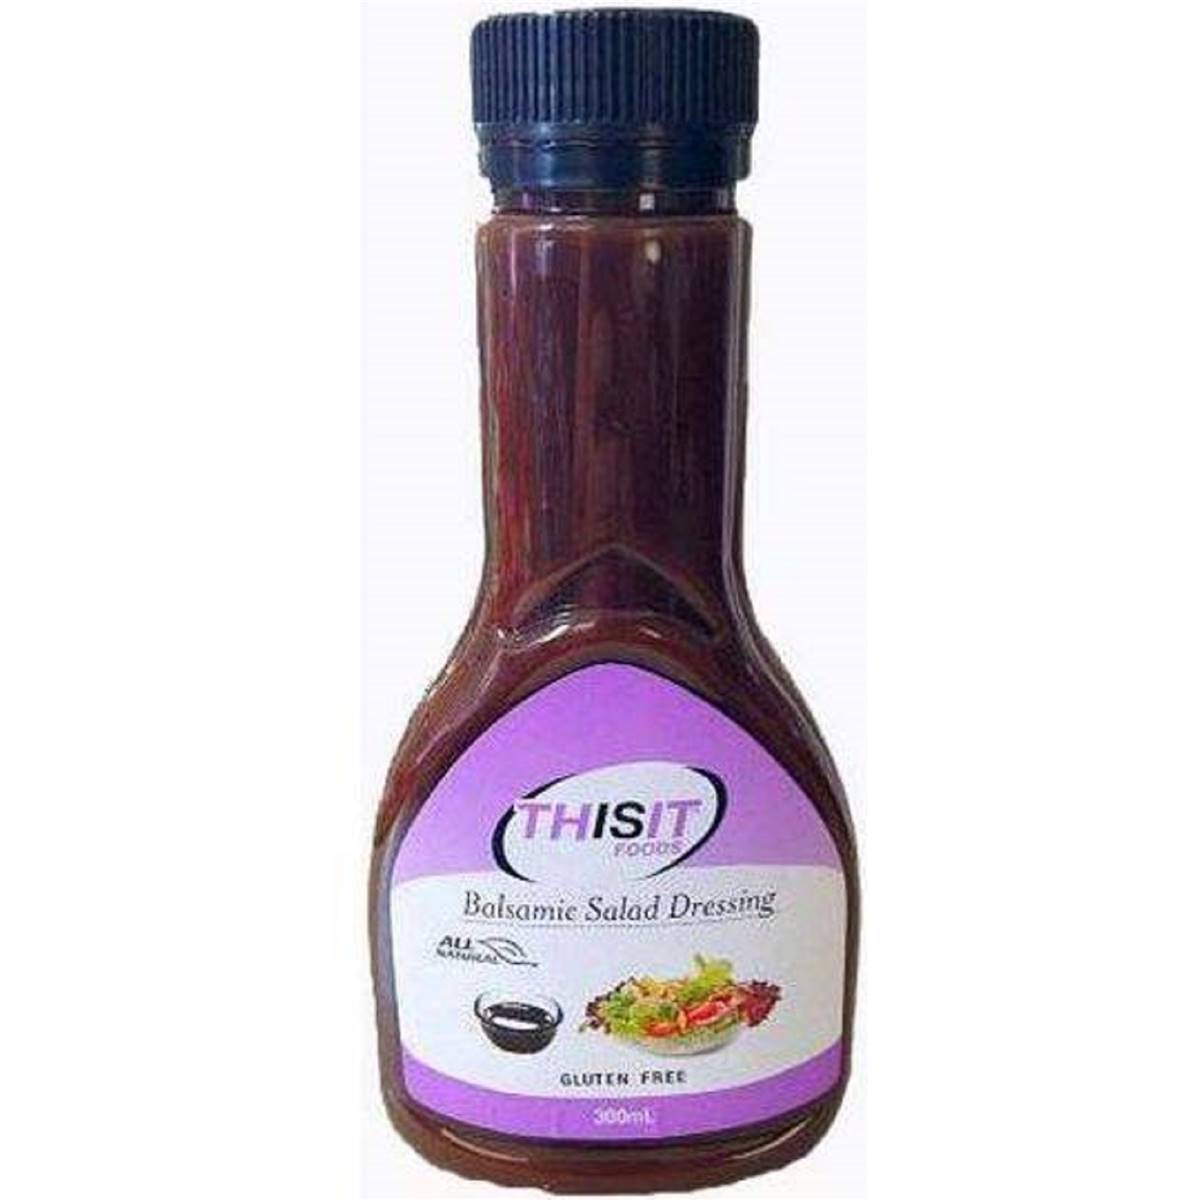 Calories in Thisit Dressing Balsamic